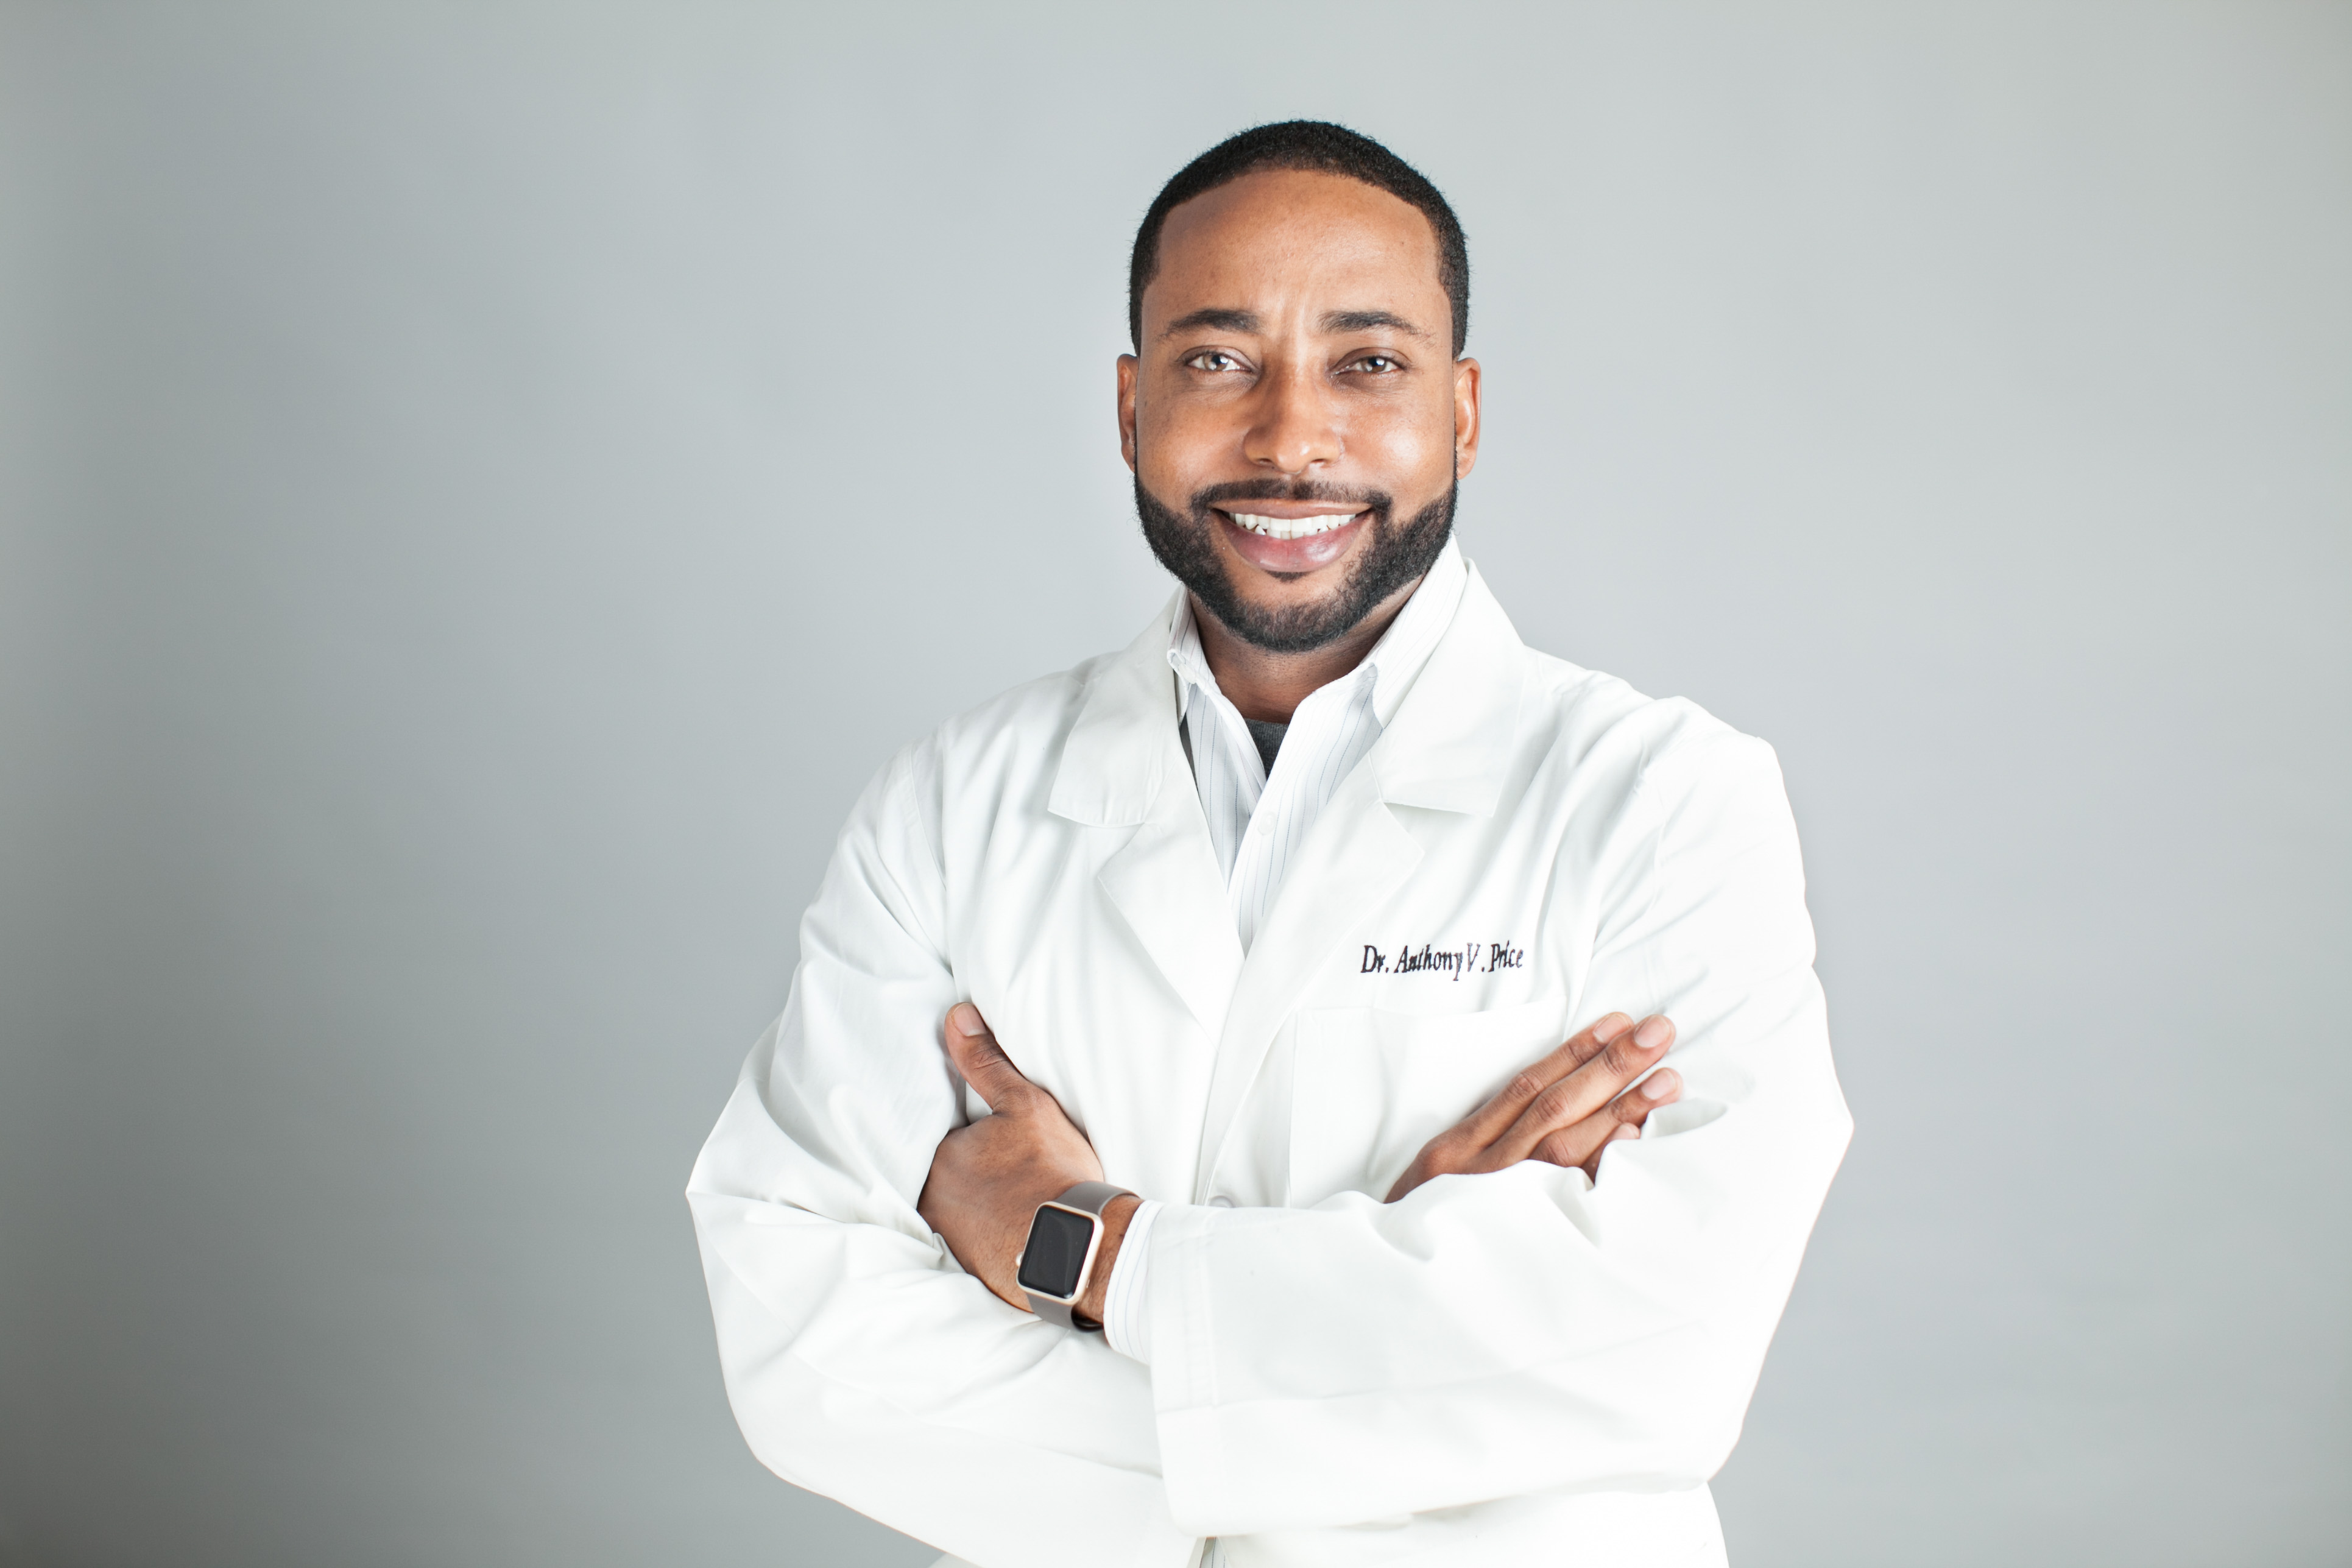 SmilesByDr.Price - Black Owned Dental Practices